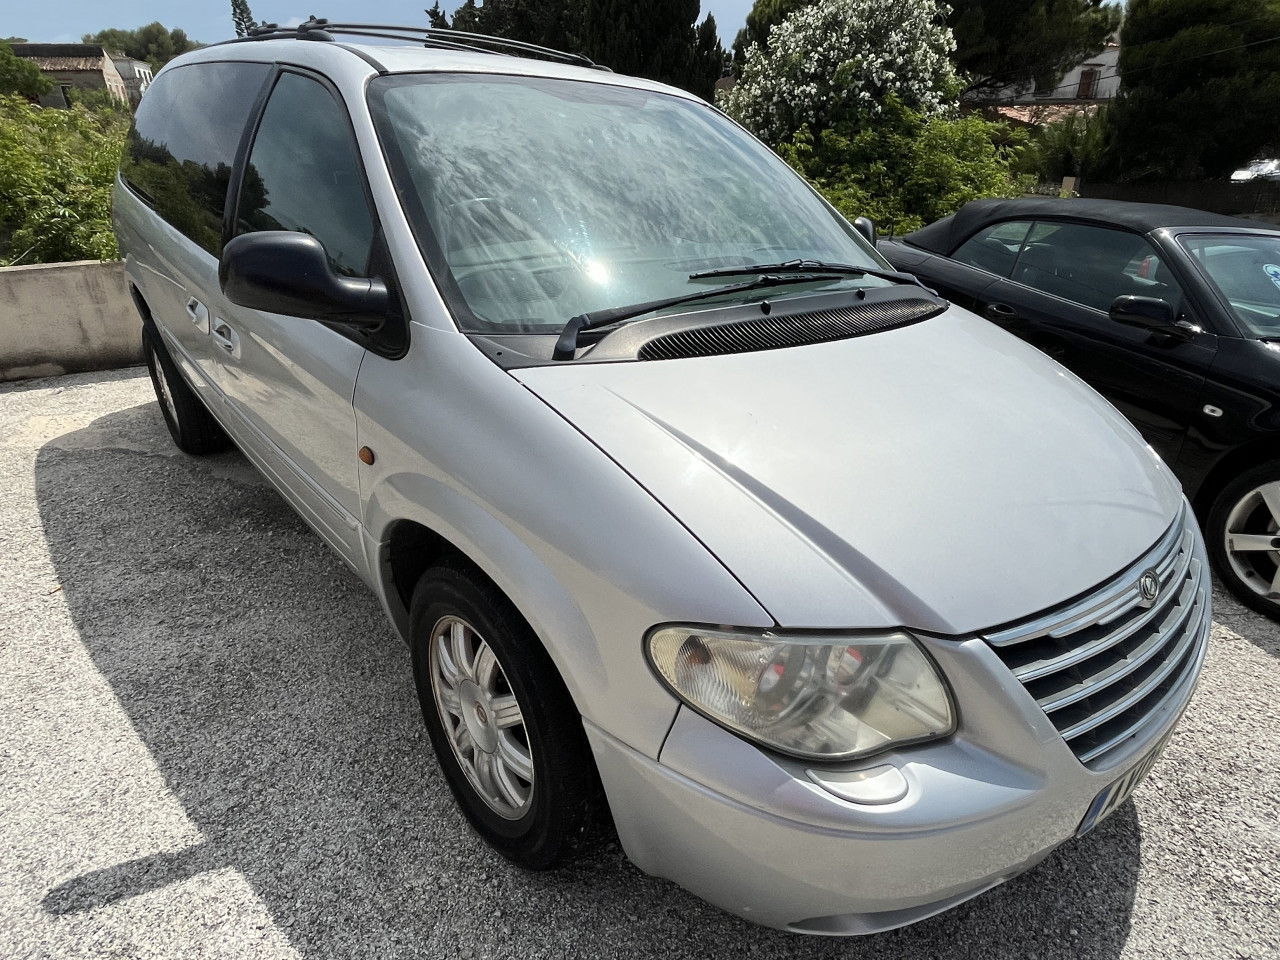 Chrysler Grand Voyager 2.8 Crdi Limited Xsa Automatic People carrier Photo